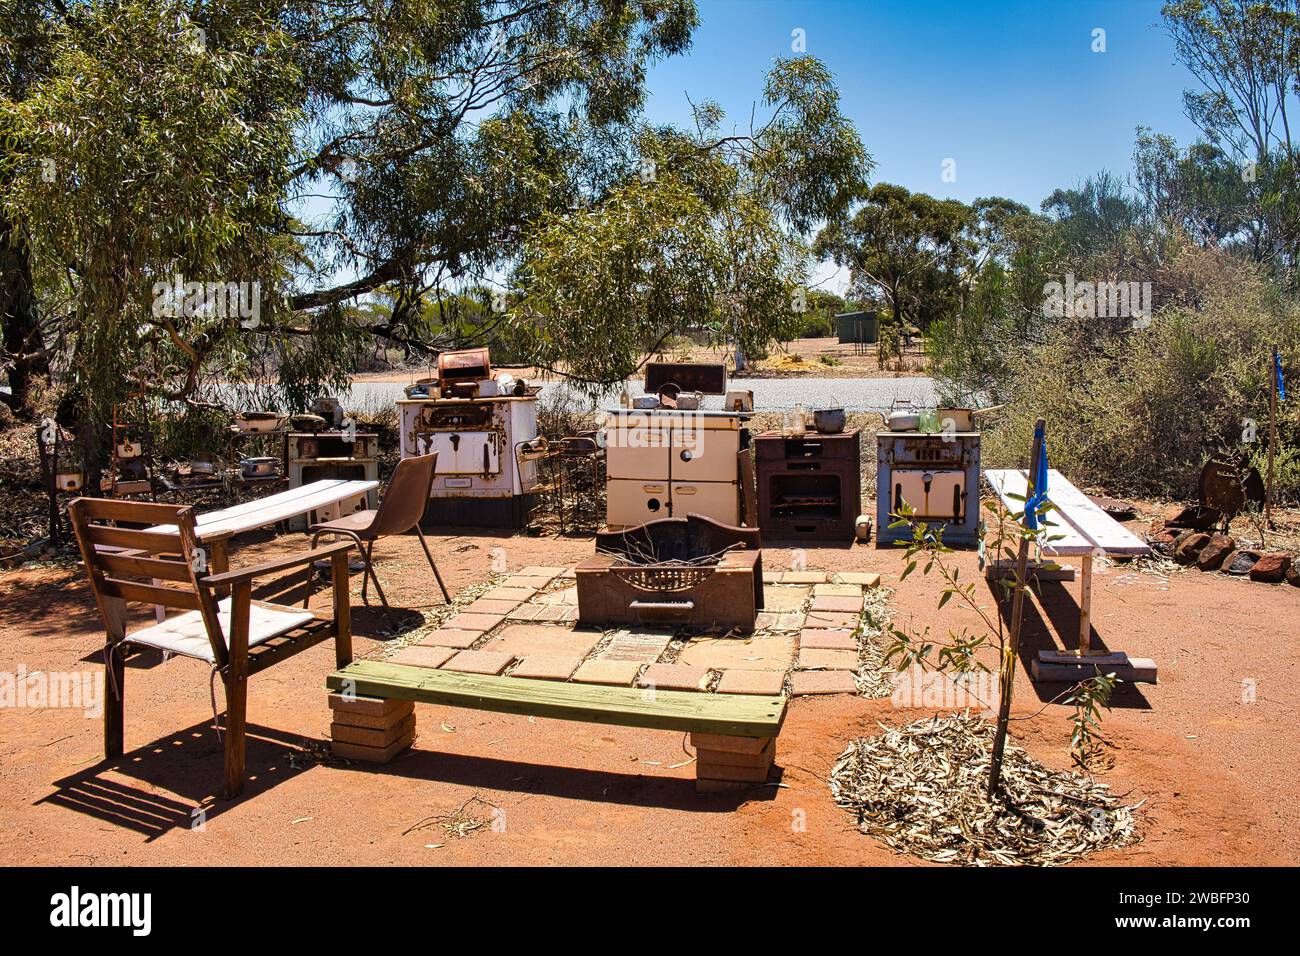 Barbecue- and picnic area with old wood-burning cookers in a park in a small town in the Australian outback (Latham, Western Australia) Stock Photo